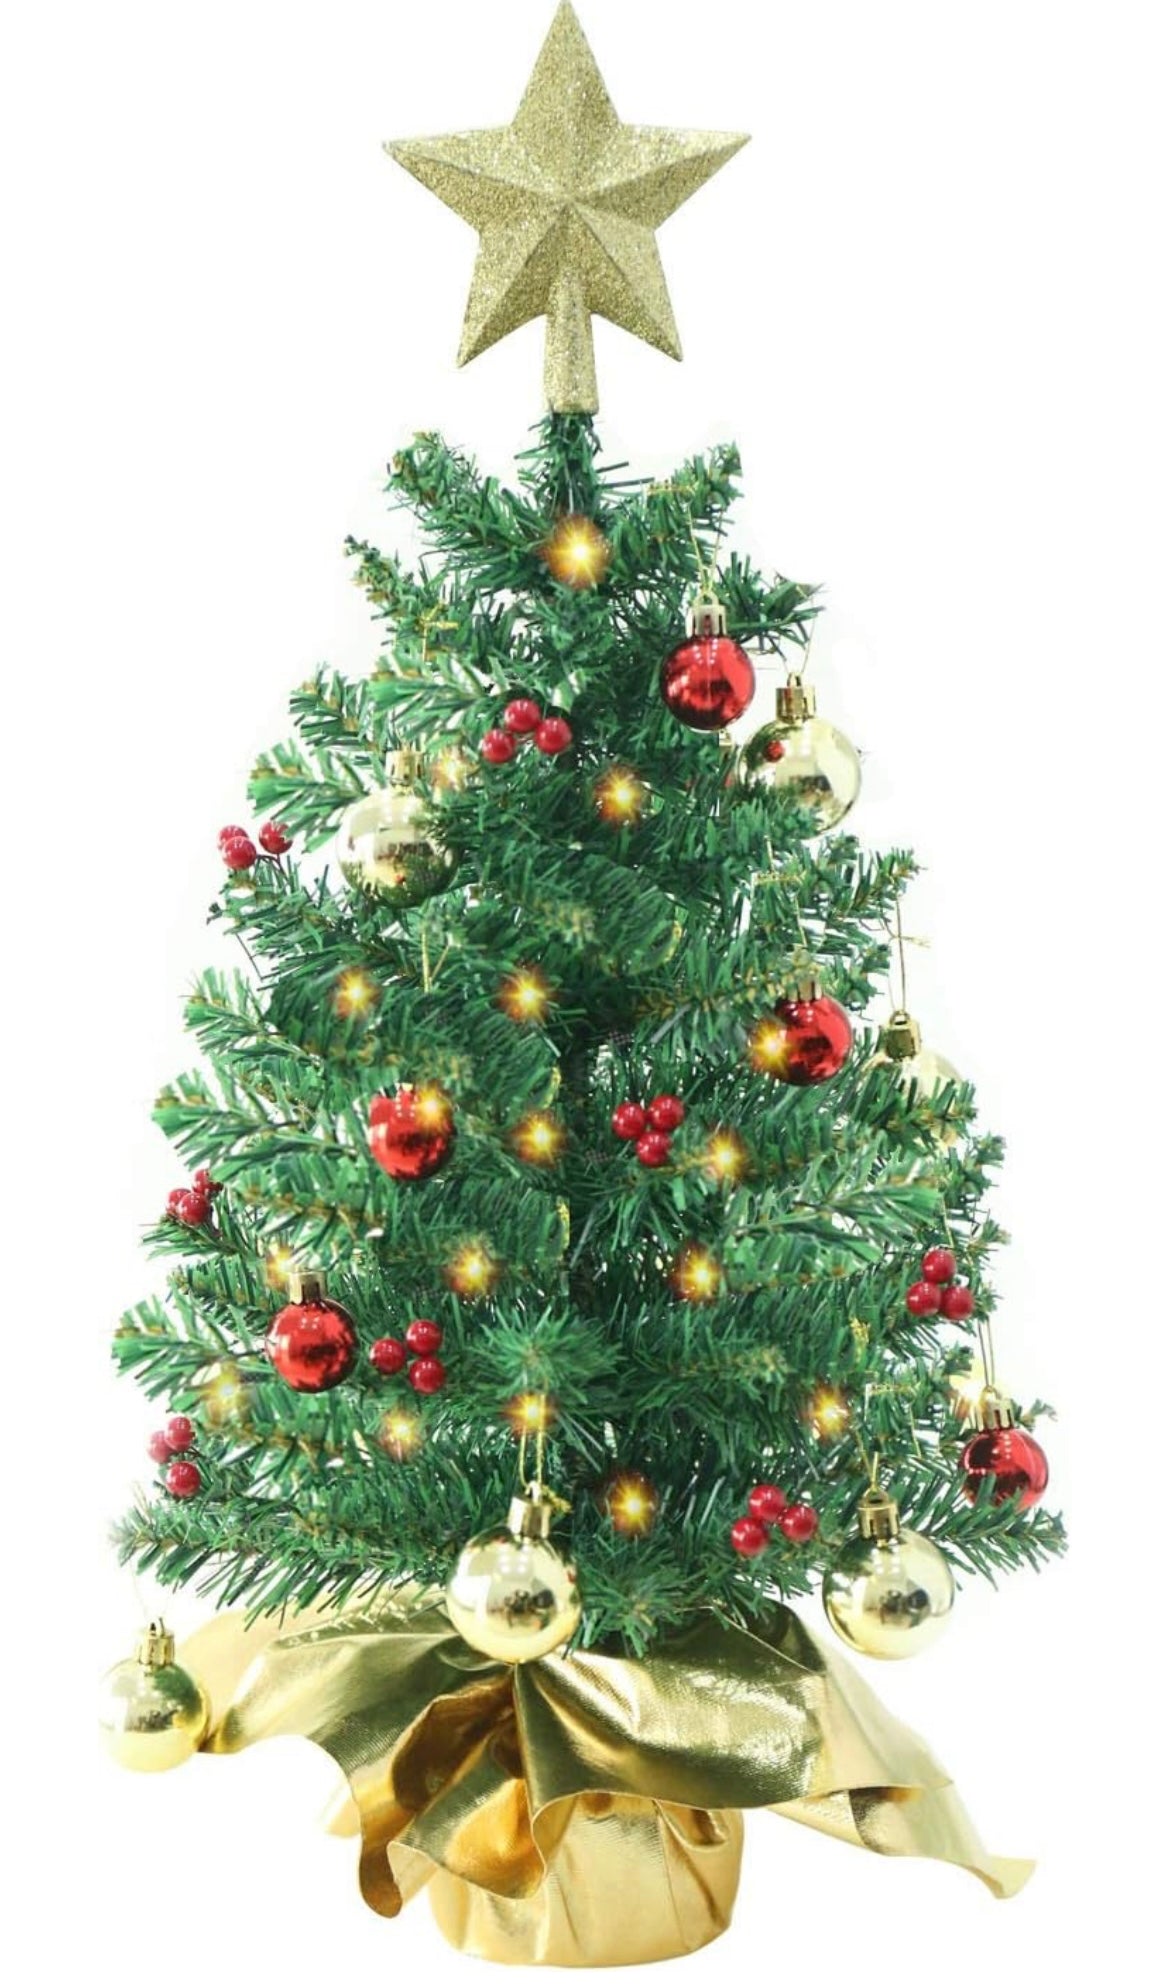 Liecho 24 Inch Tabletop Mini Christmas Tree, Miniature Pine Christmas Tree with Hanging Ornaments, Battery Operated Artificial Xmas Tree, Best DIY Christmas Decorations-Gold